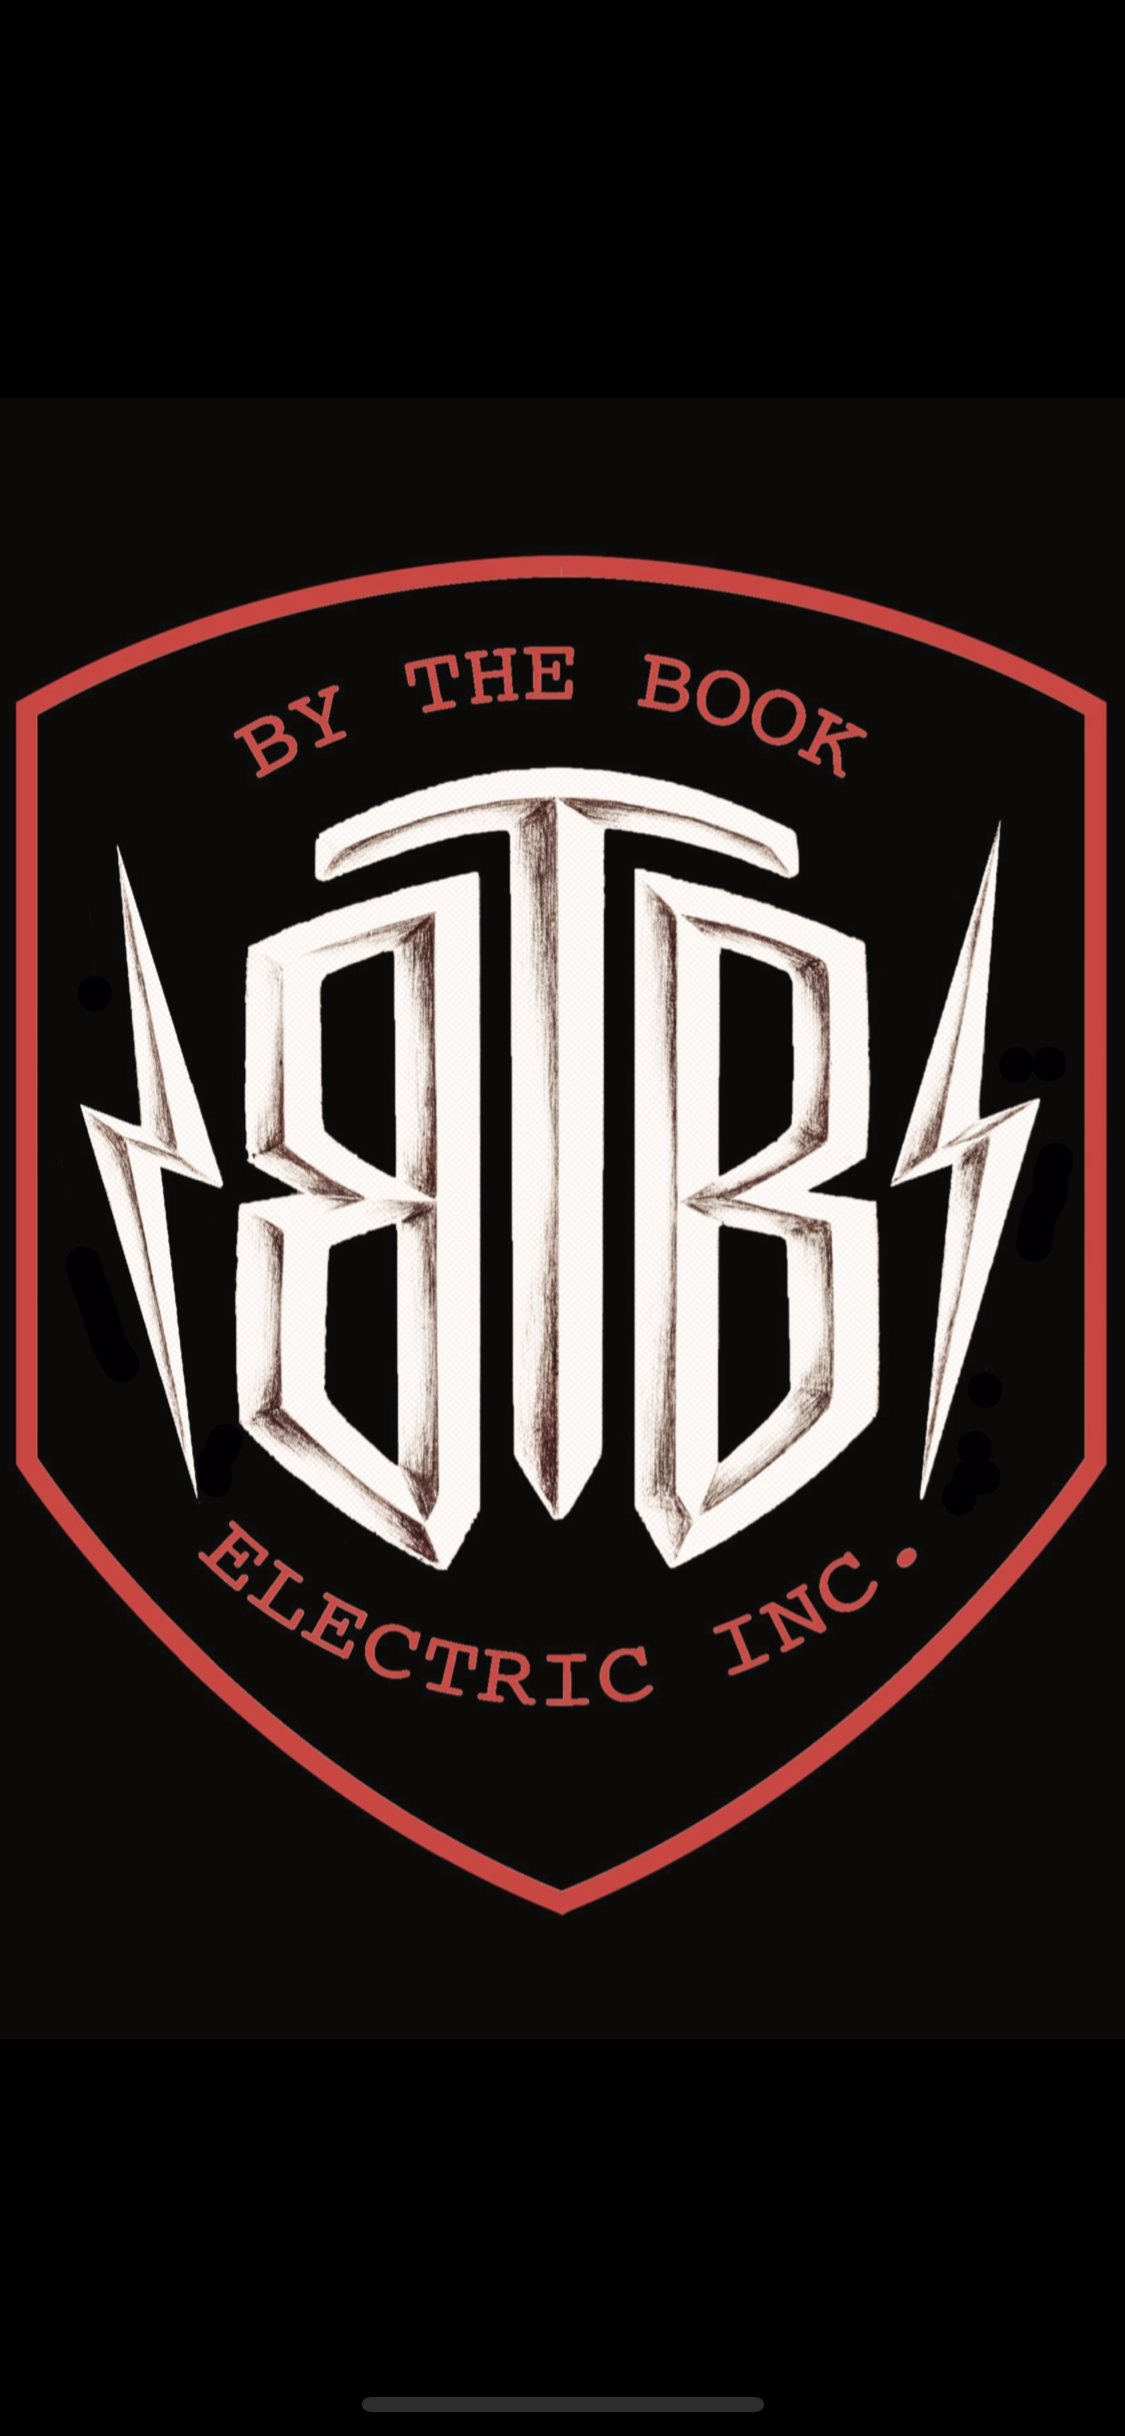 By the Book Electric, Inc. Logo